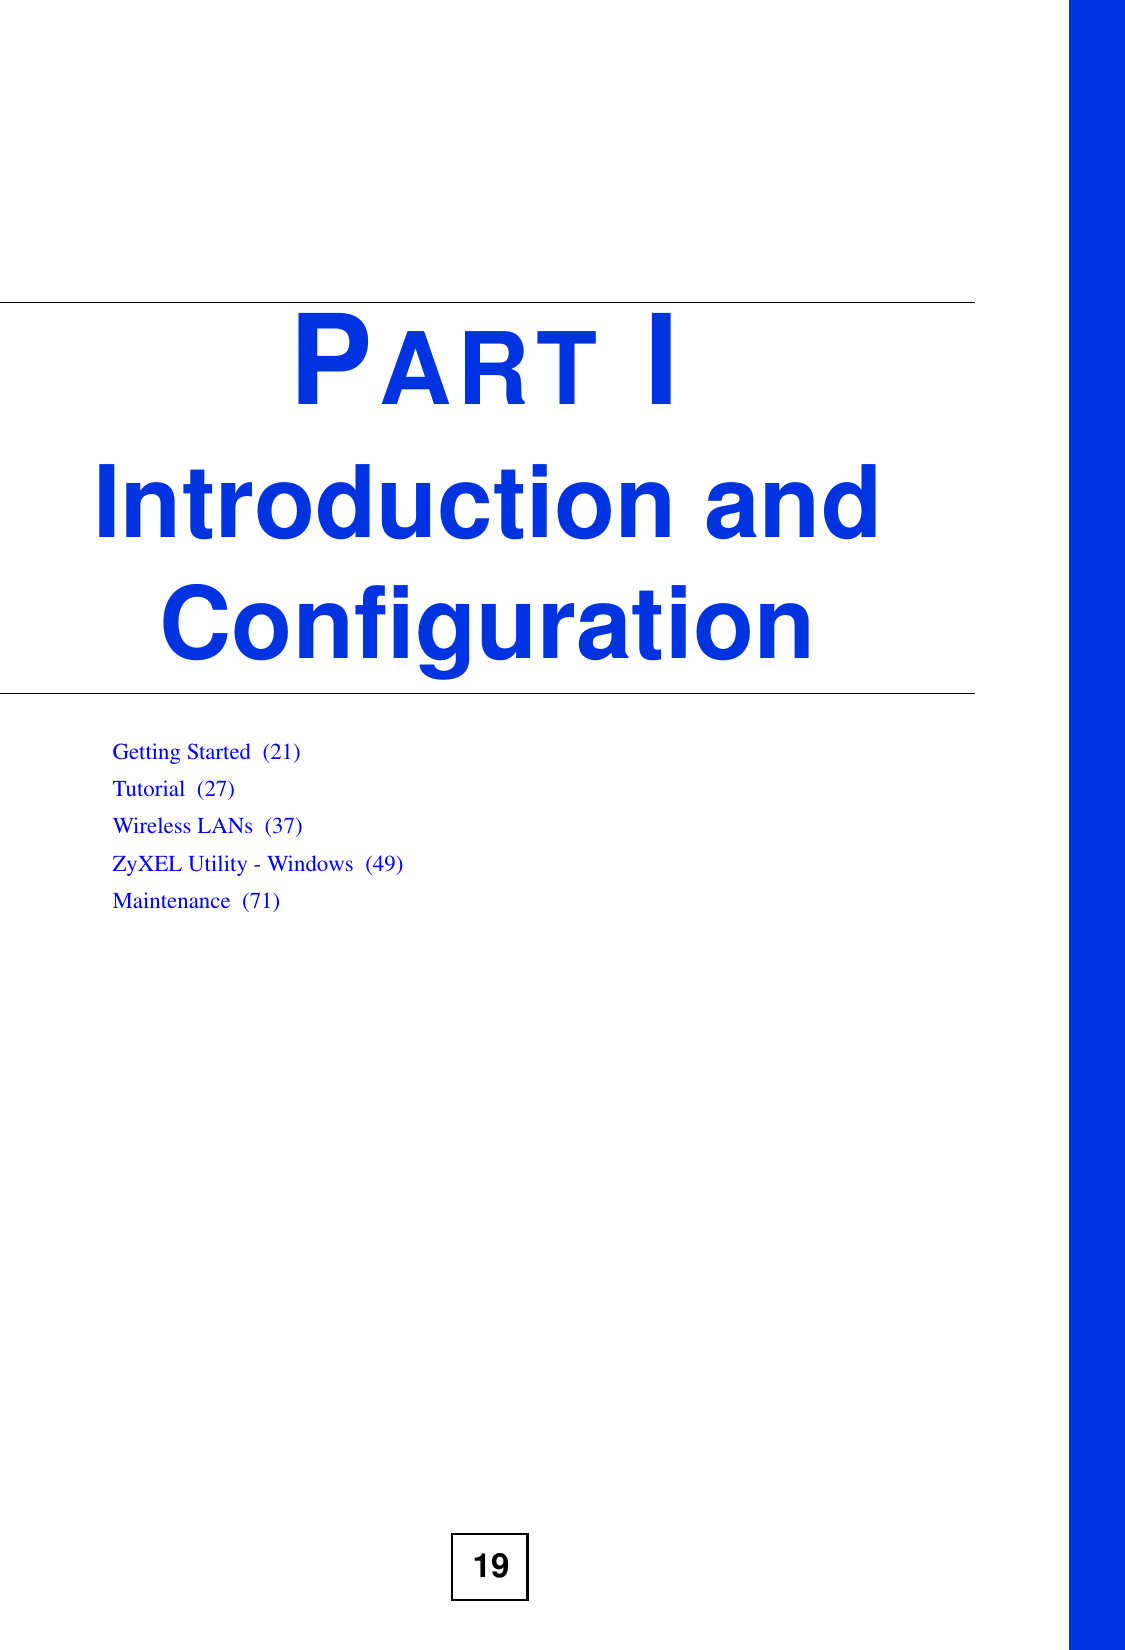 19PART IIntroduction and ConfigurationGetting Started  (21)Tutorial  (27)Wireless LANs  (37)ZyXEL Utility - Windows  (49)Maintenance  (71)